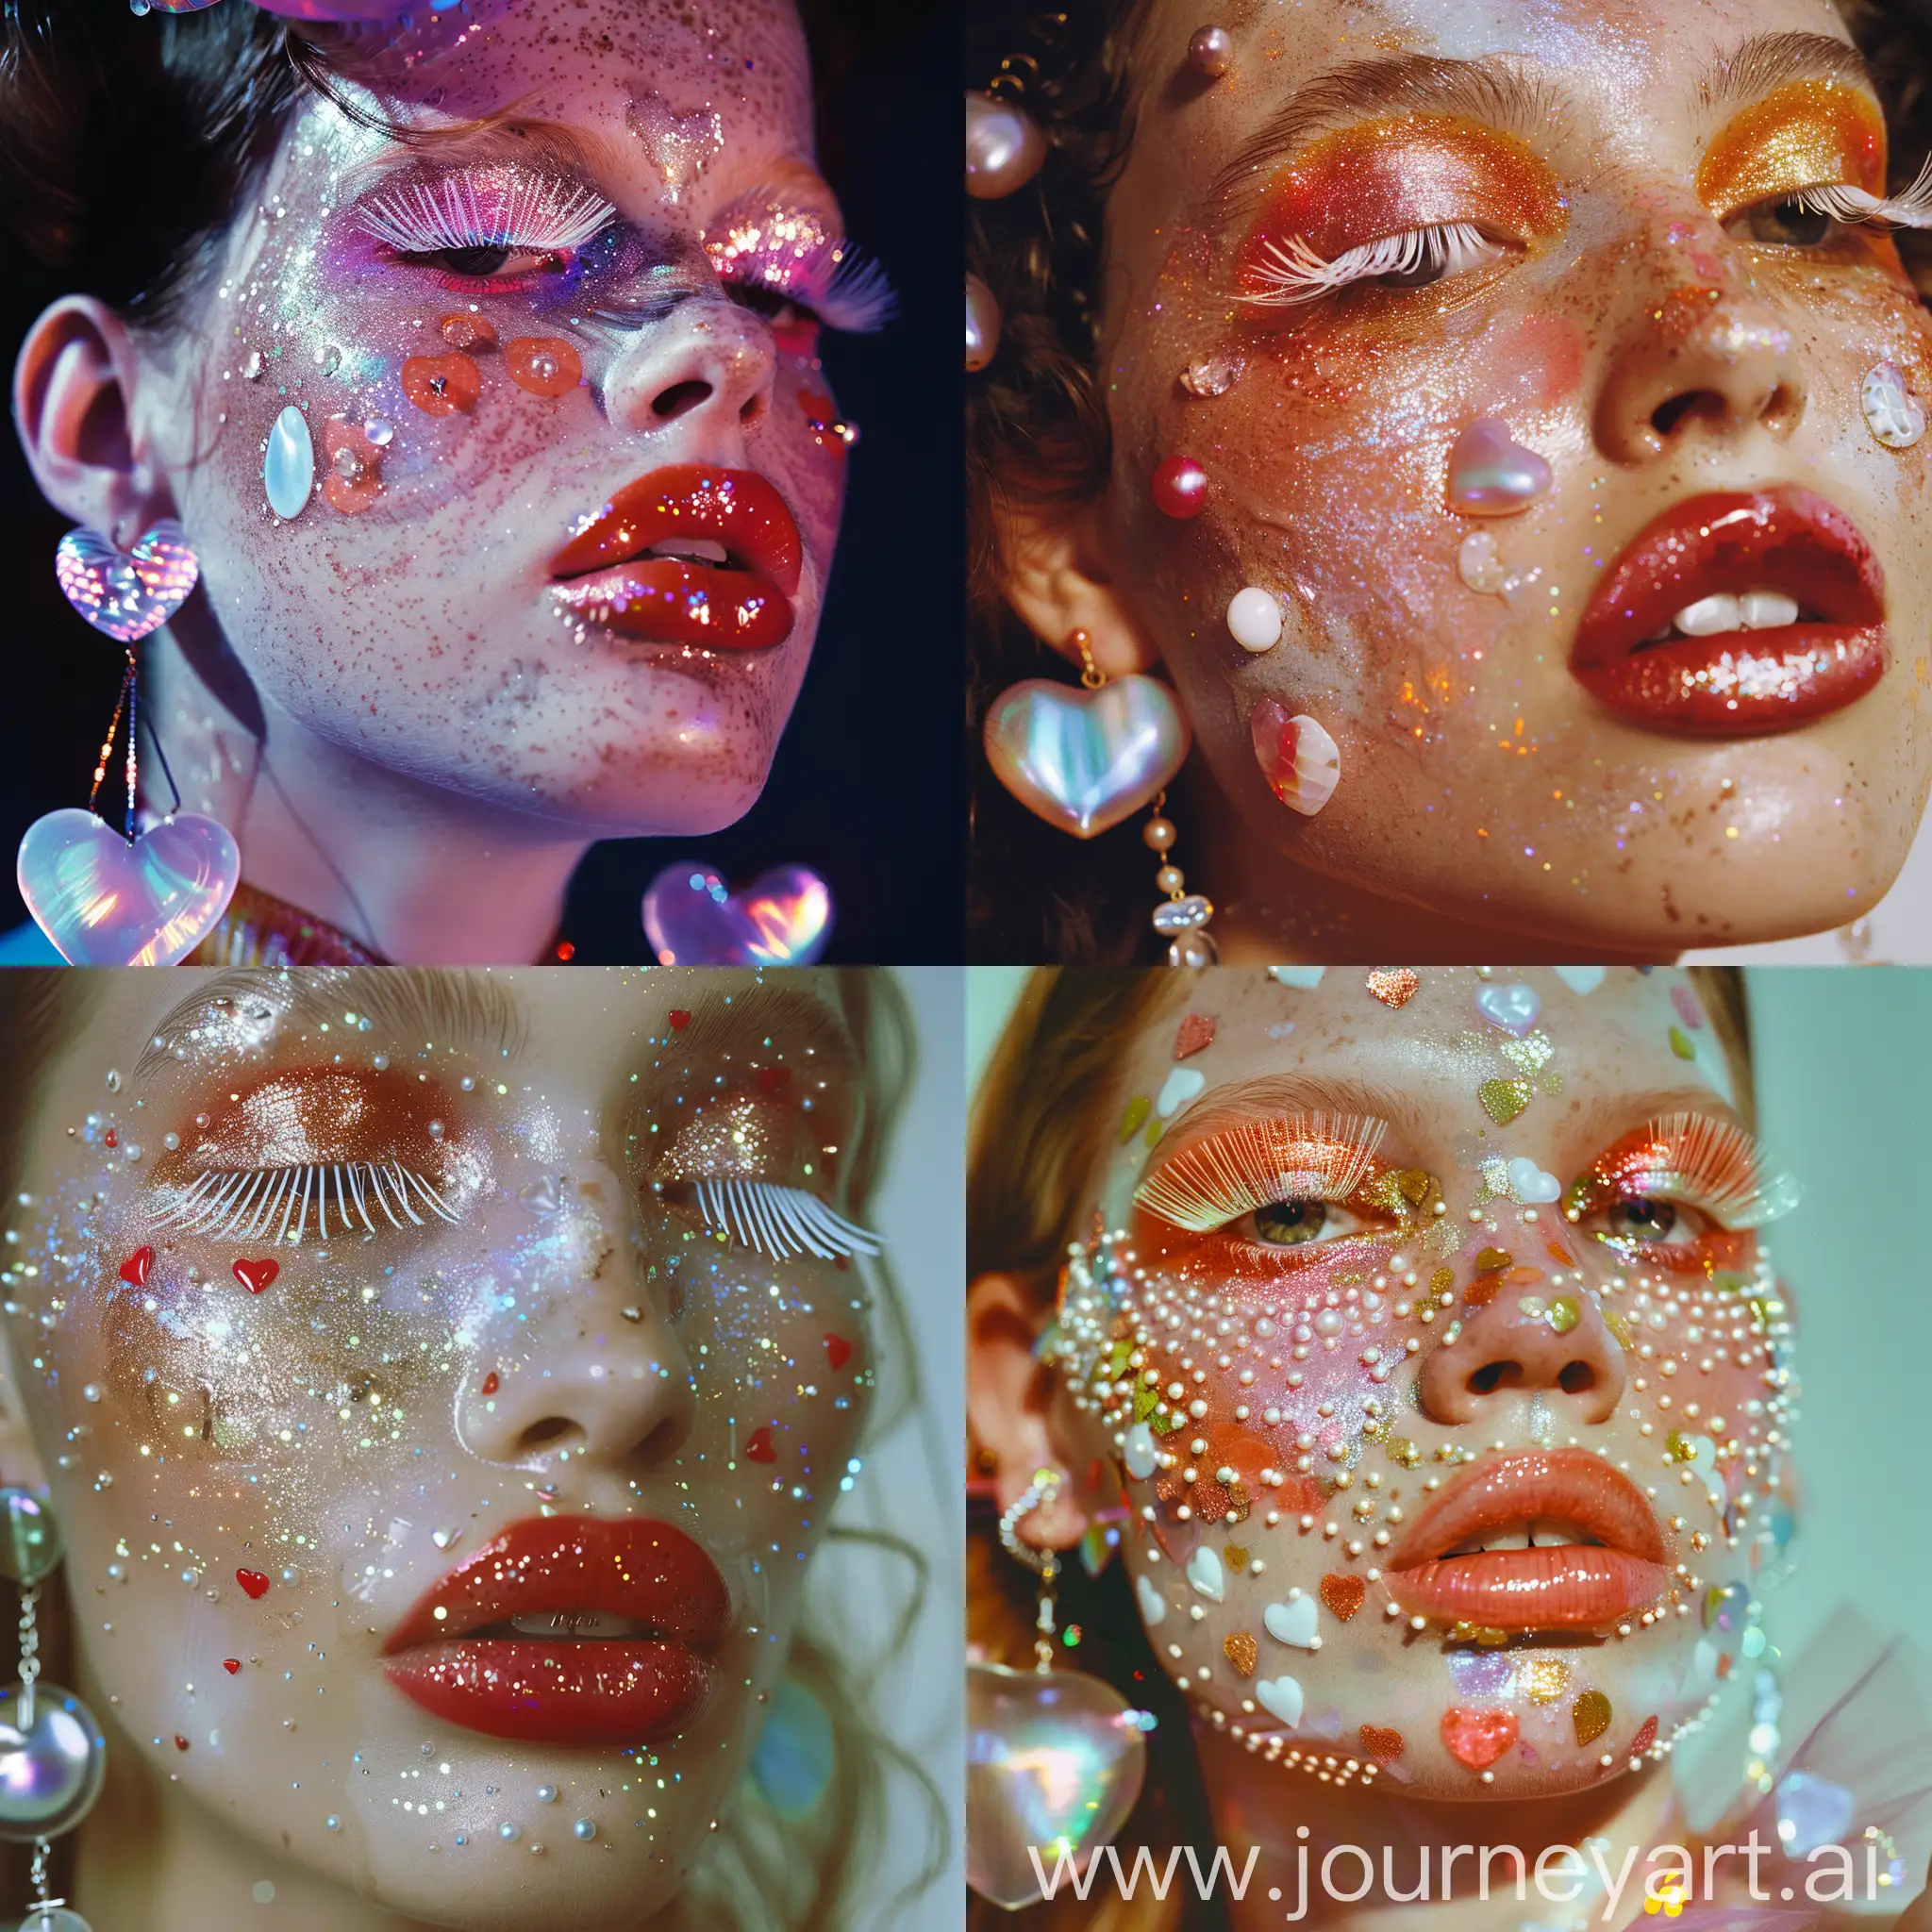 90s-Model-with-Bright-Carnival-Makeup-and-Glass-Earrings-Studio-Portrait